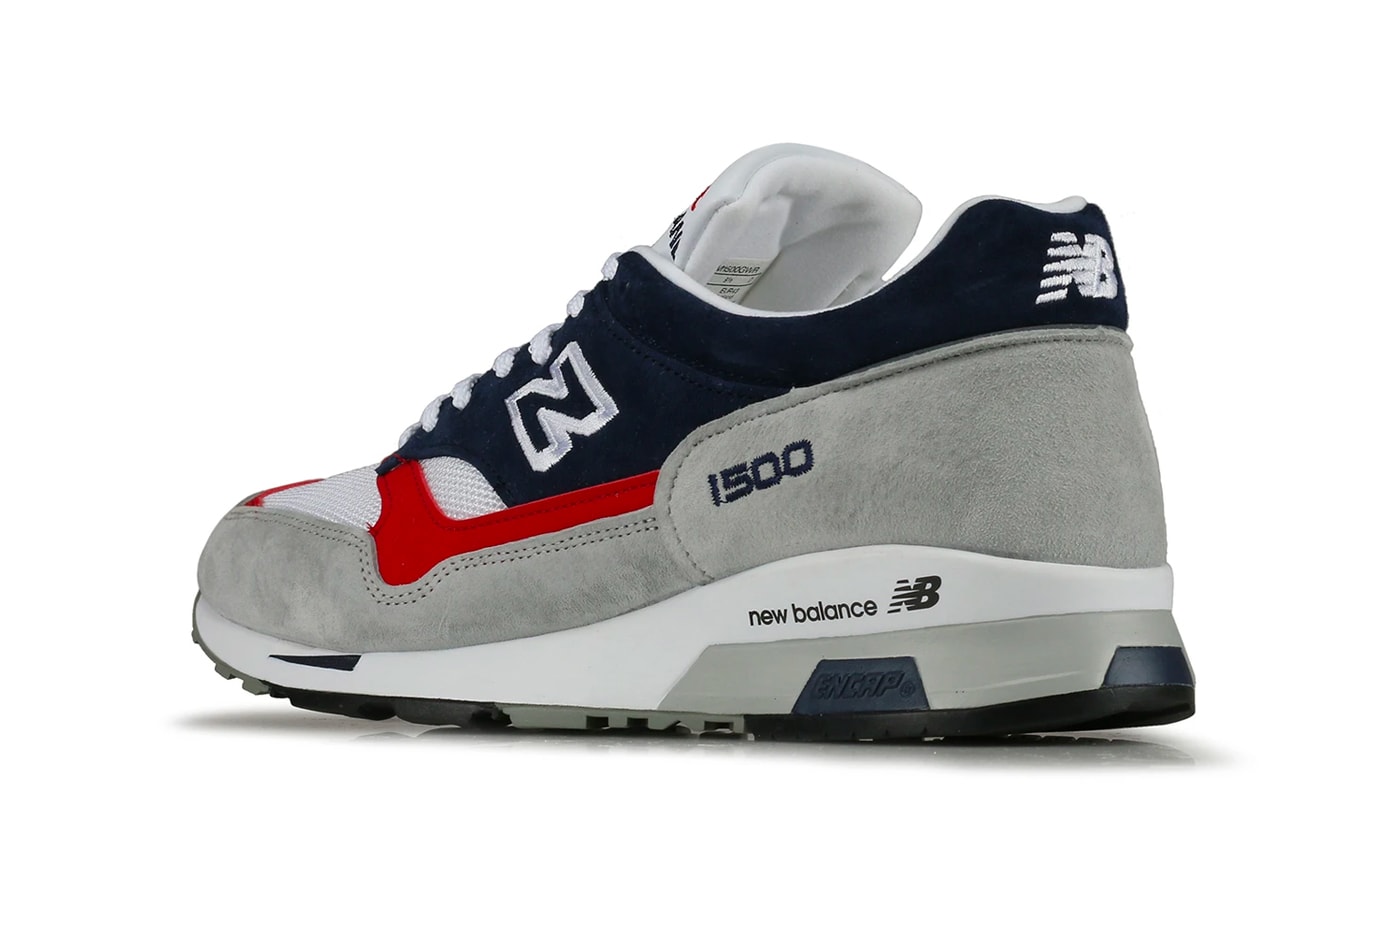 New Balance M1500GWR Gray Blue shoes Fearlessly Independent Since 1906 footwear sneakers menswear streetwear trainers runners kicks spring summer 2020 collection 